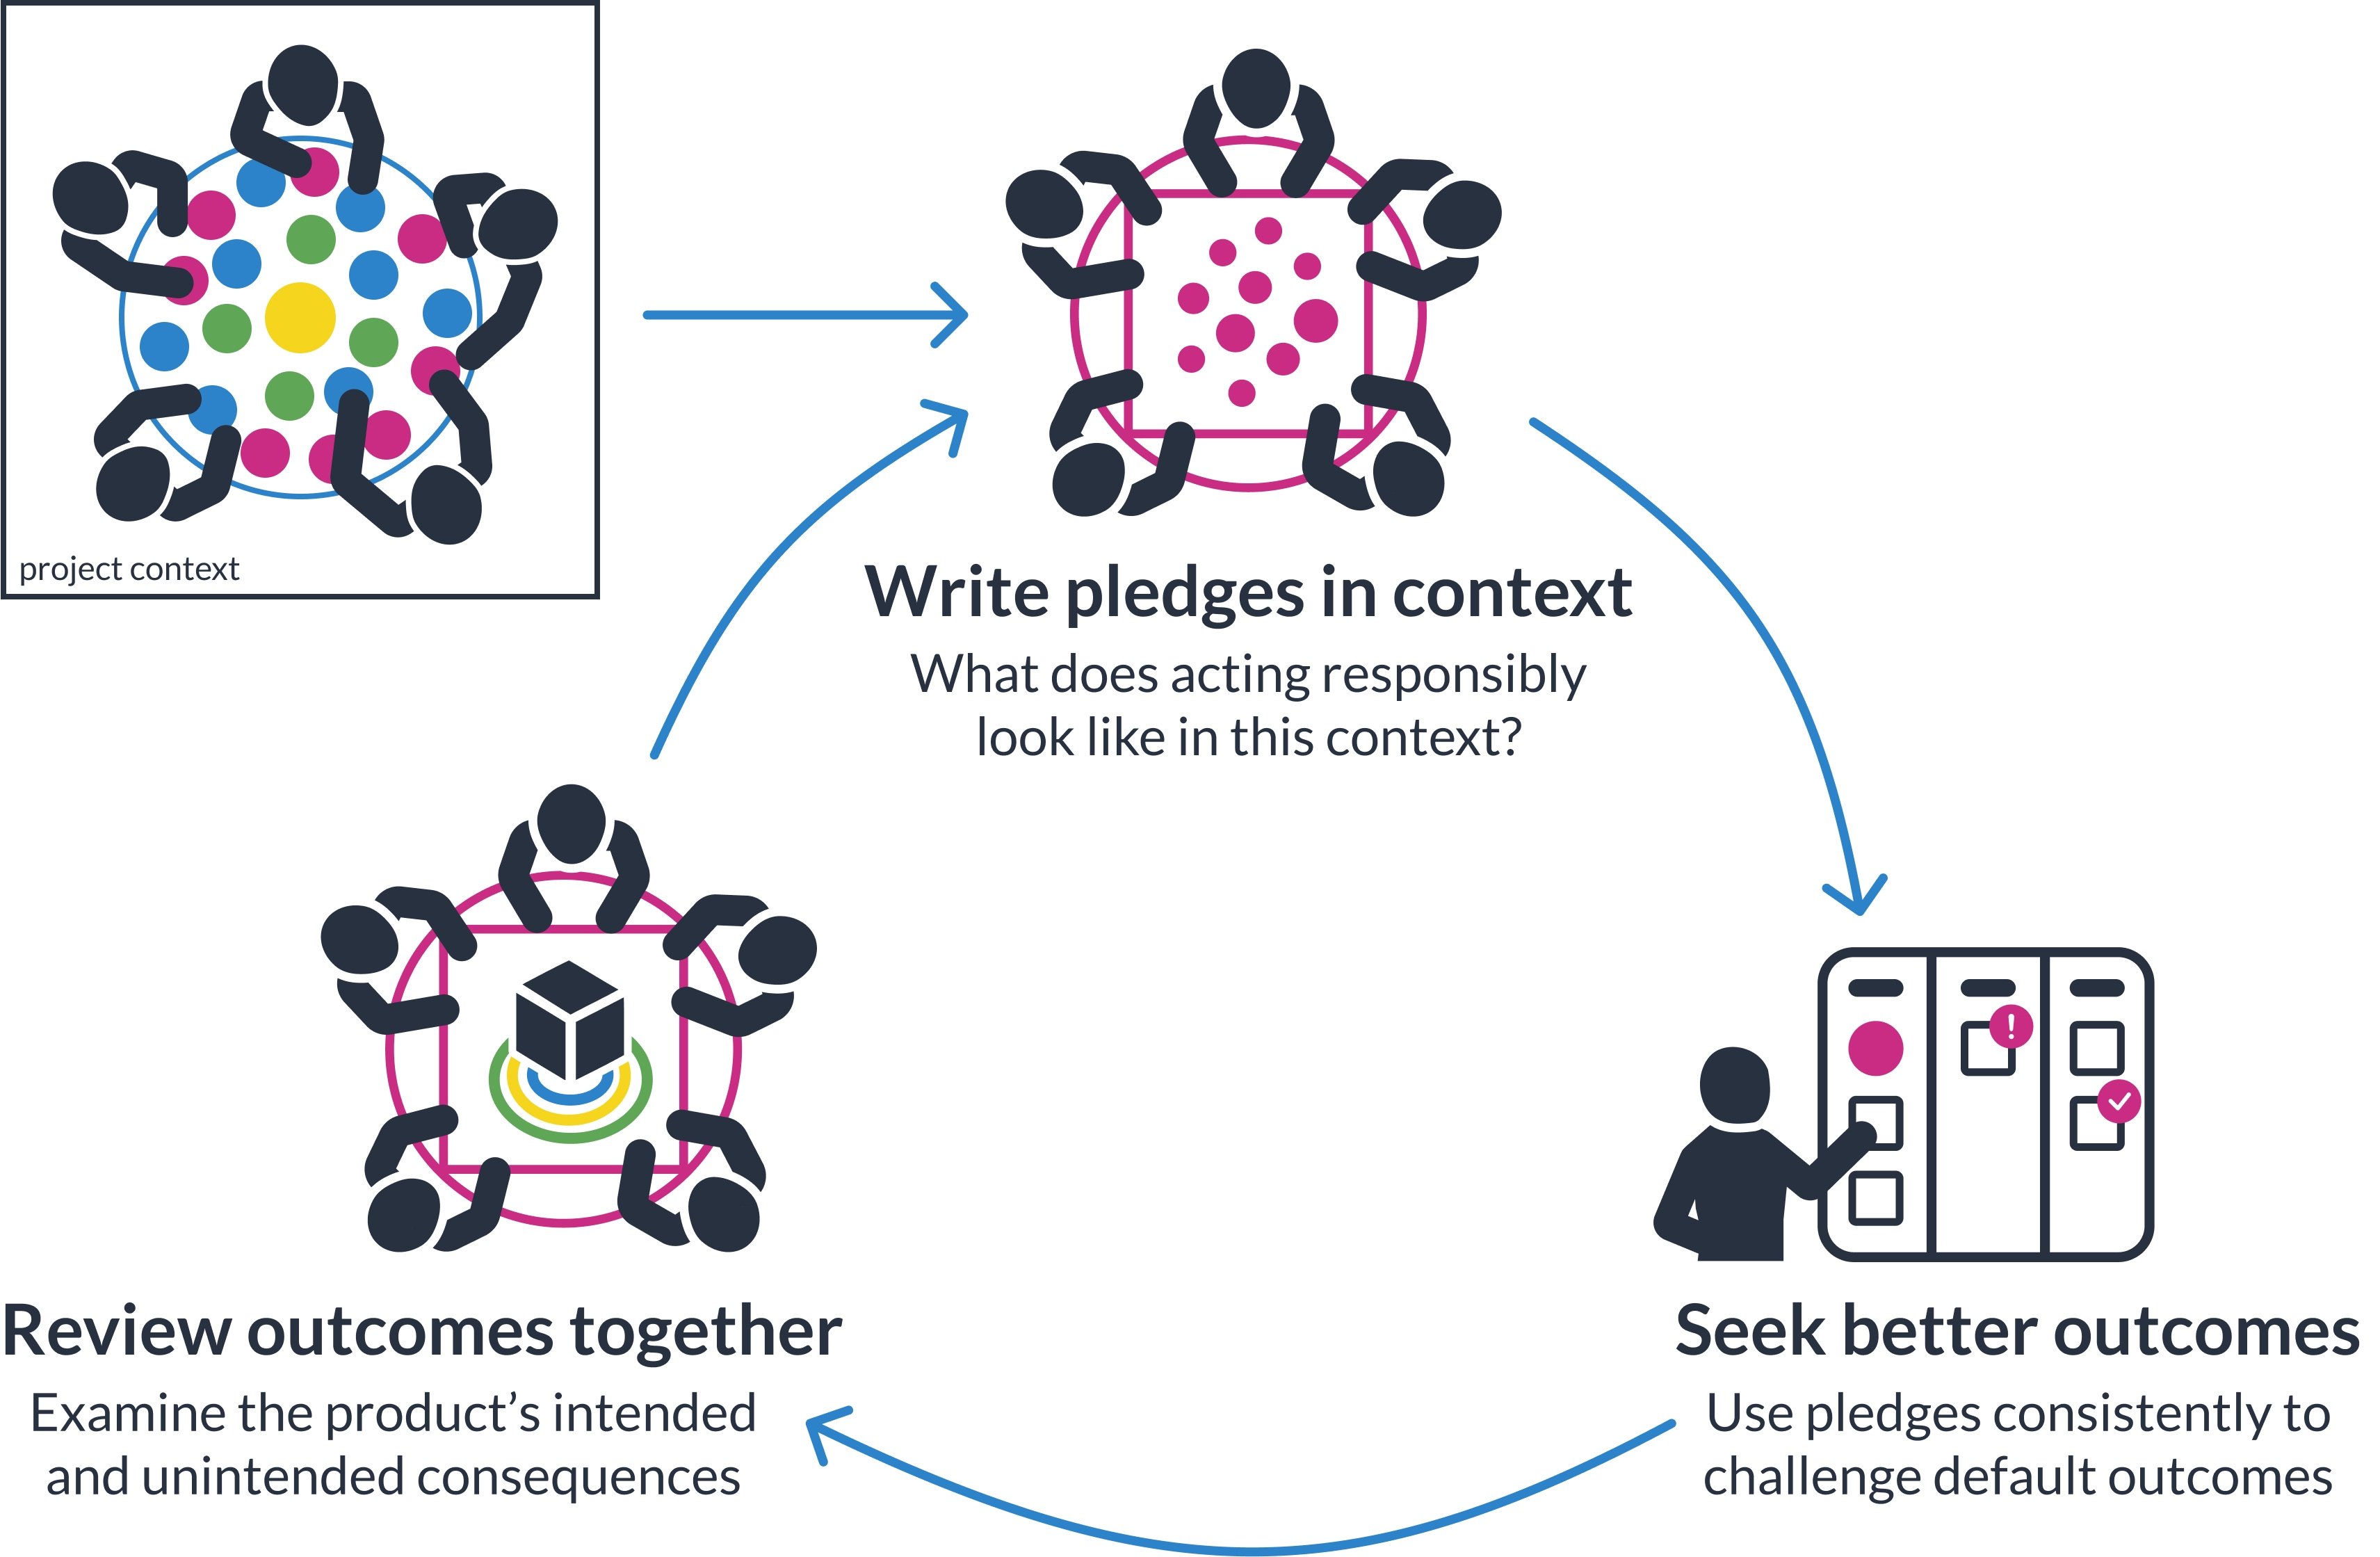 A graphic showing elements of the Pledge Works process. All parts of the process are described in detail in the text below.